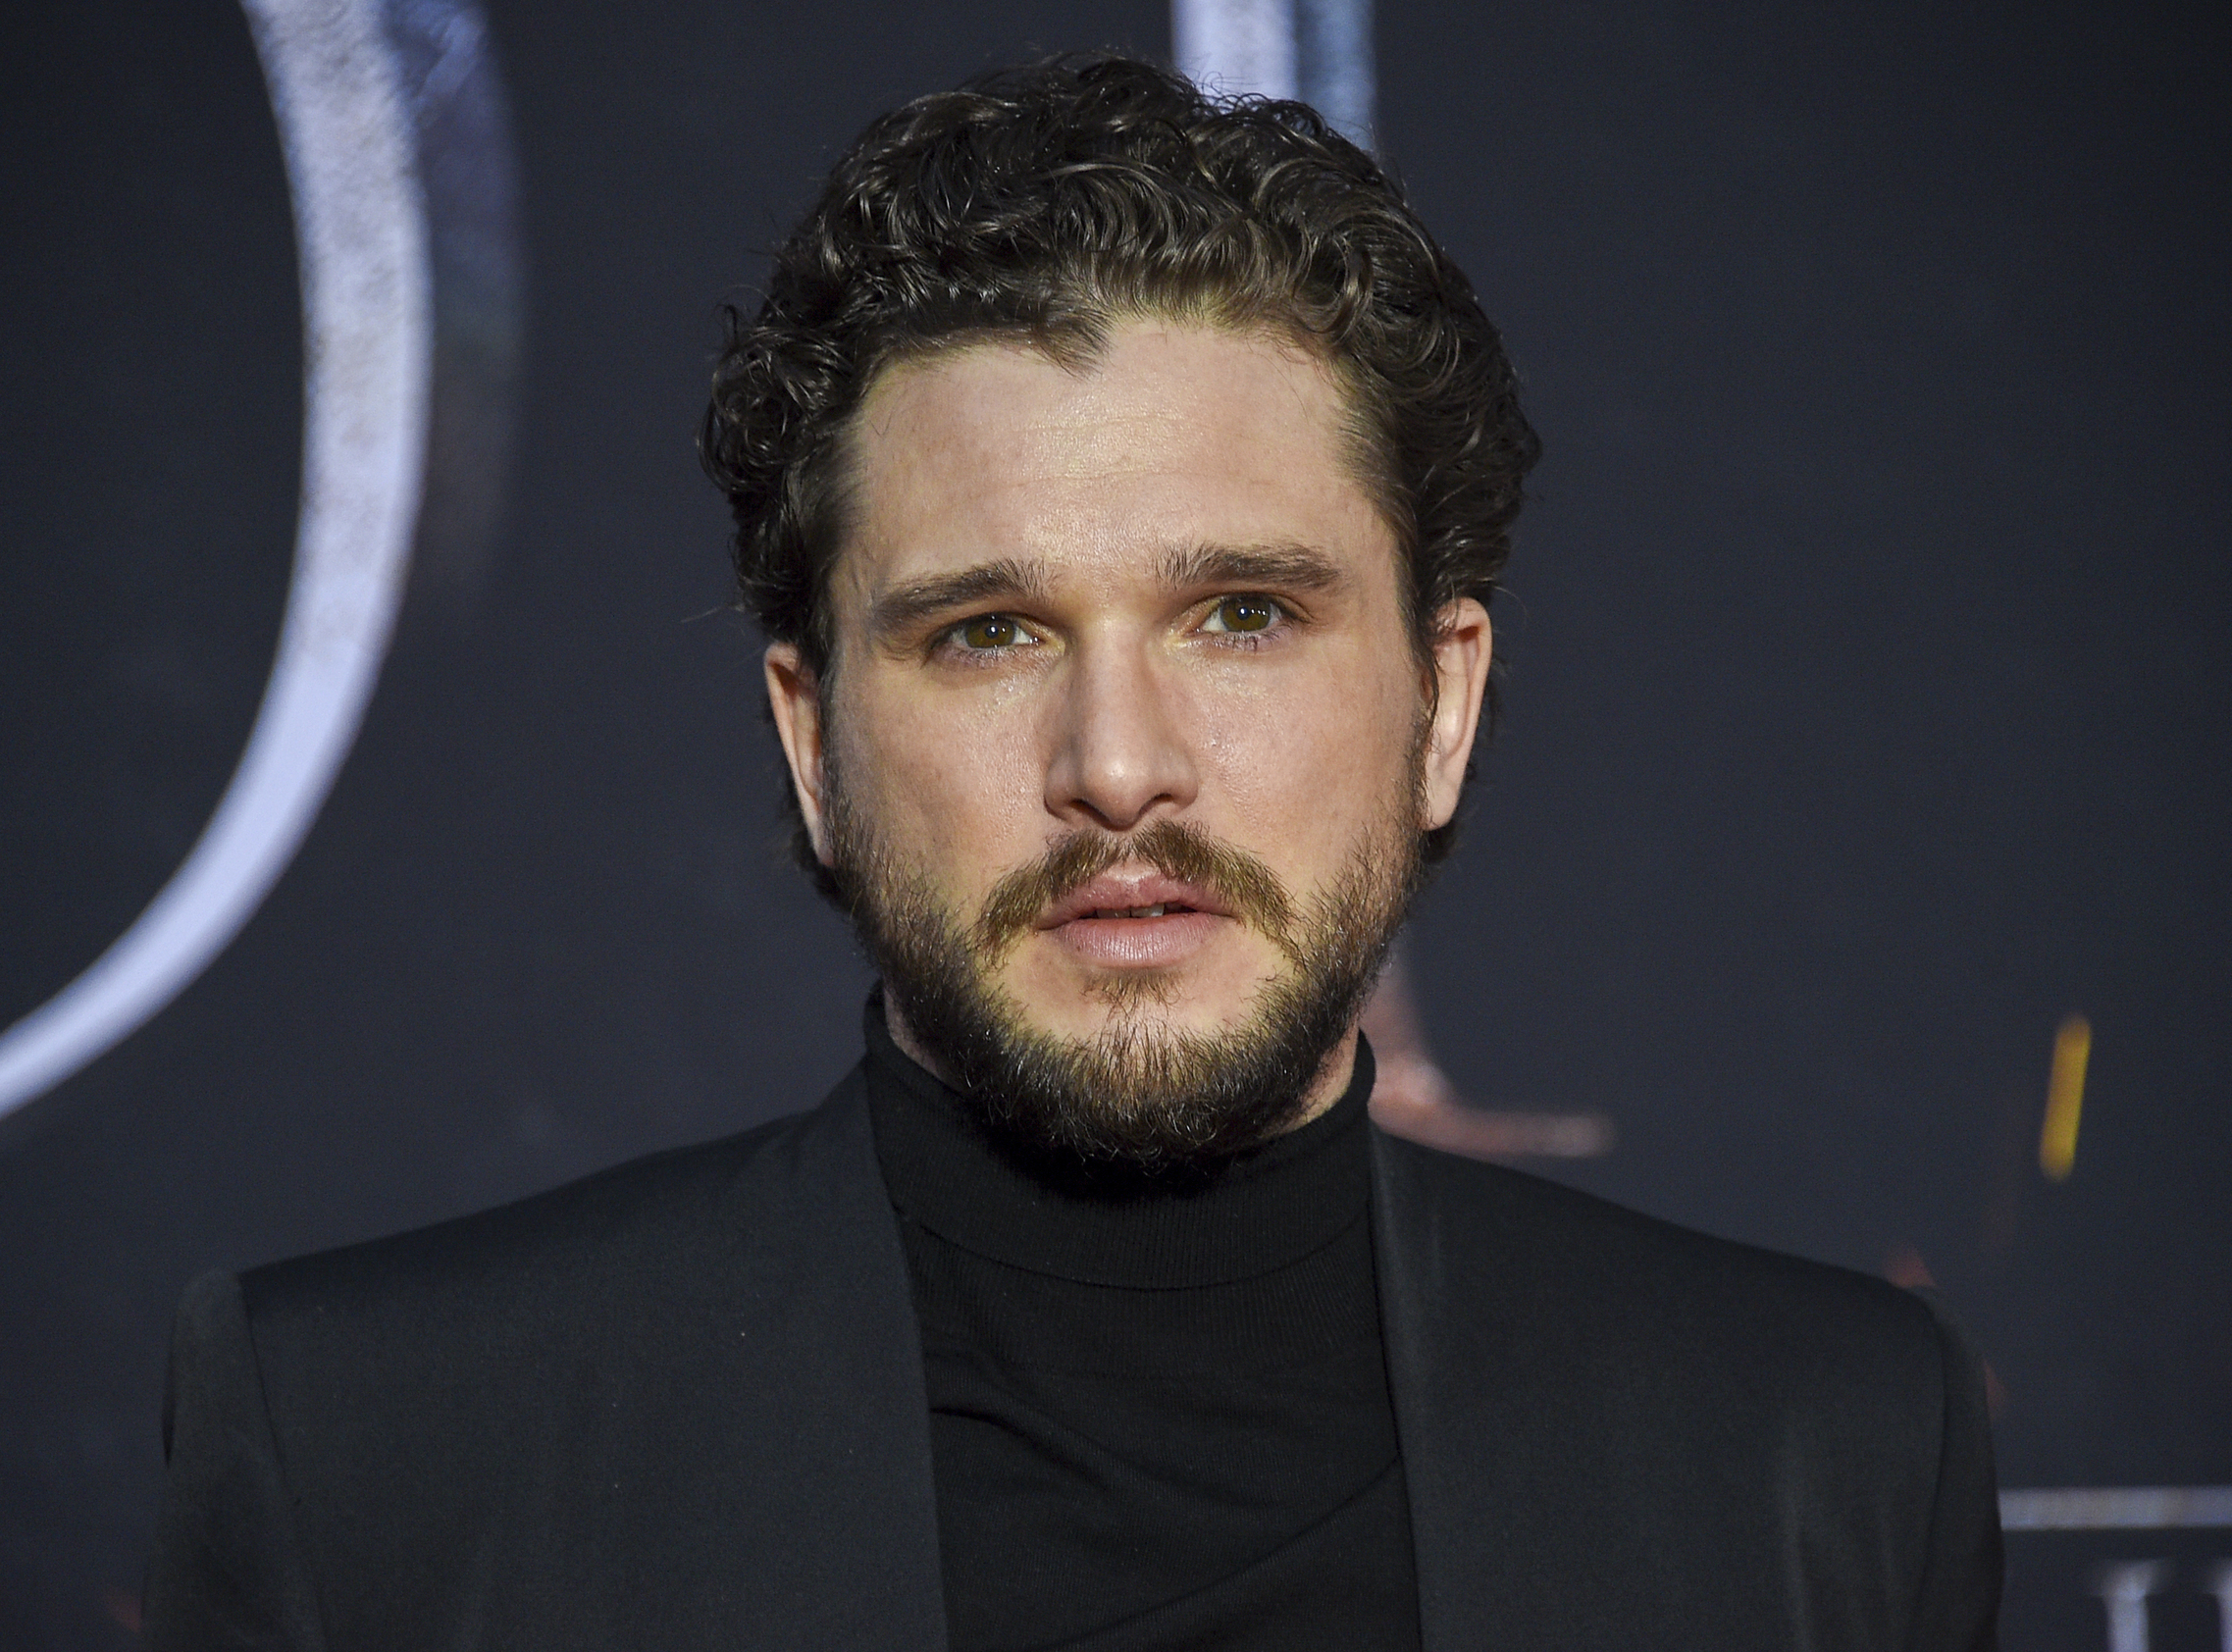 FILE - This April 3, 2019 file photo shows Kit Harington at HBO's "Game of Thrones" final season premiere in New York. "Game of Thrones" star Harington has checked into a wellness retreat to work on what his representative says are "personal issues." A representative for Harington said Tuesday, May 28, the British actor was utilizing a post-"Game of Thrones" break in his schedule to spend time at the facility. No additional details were released. (Photo by Evan Agostini/Invision/AP, File)